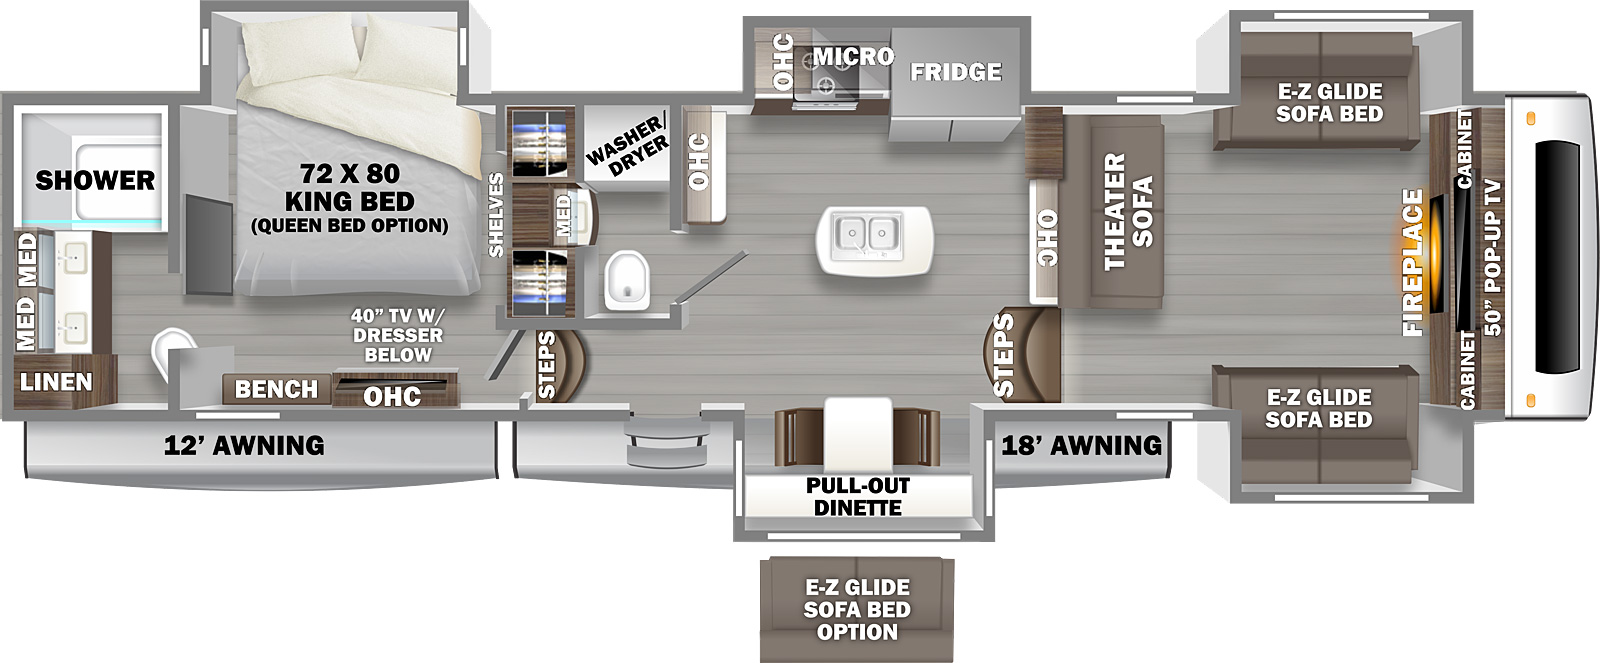 RIVERSTONE 39RBFL floorplan. The 39RBFL has 5 slide outs and one entry door.